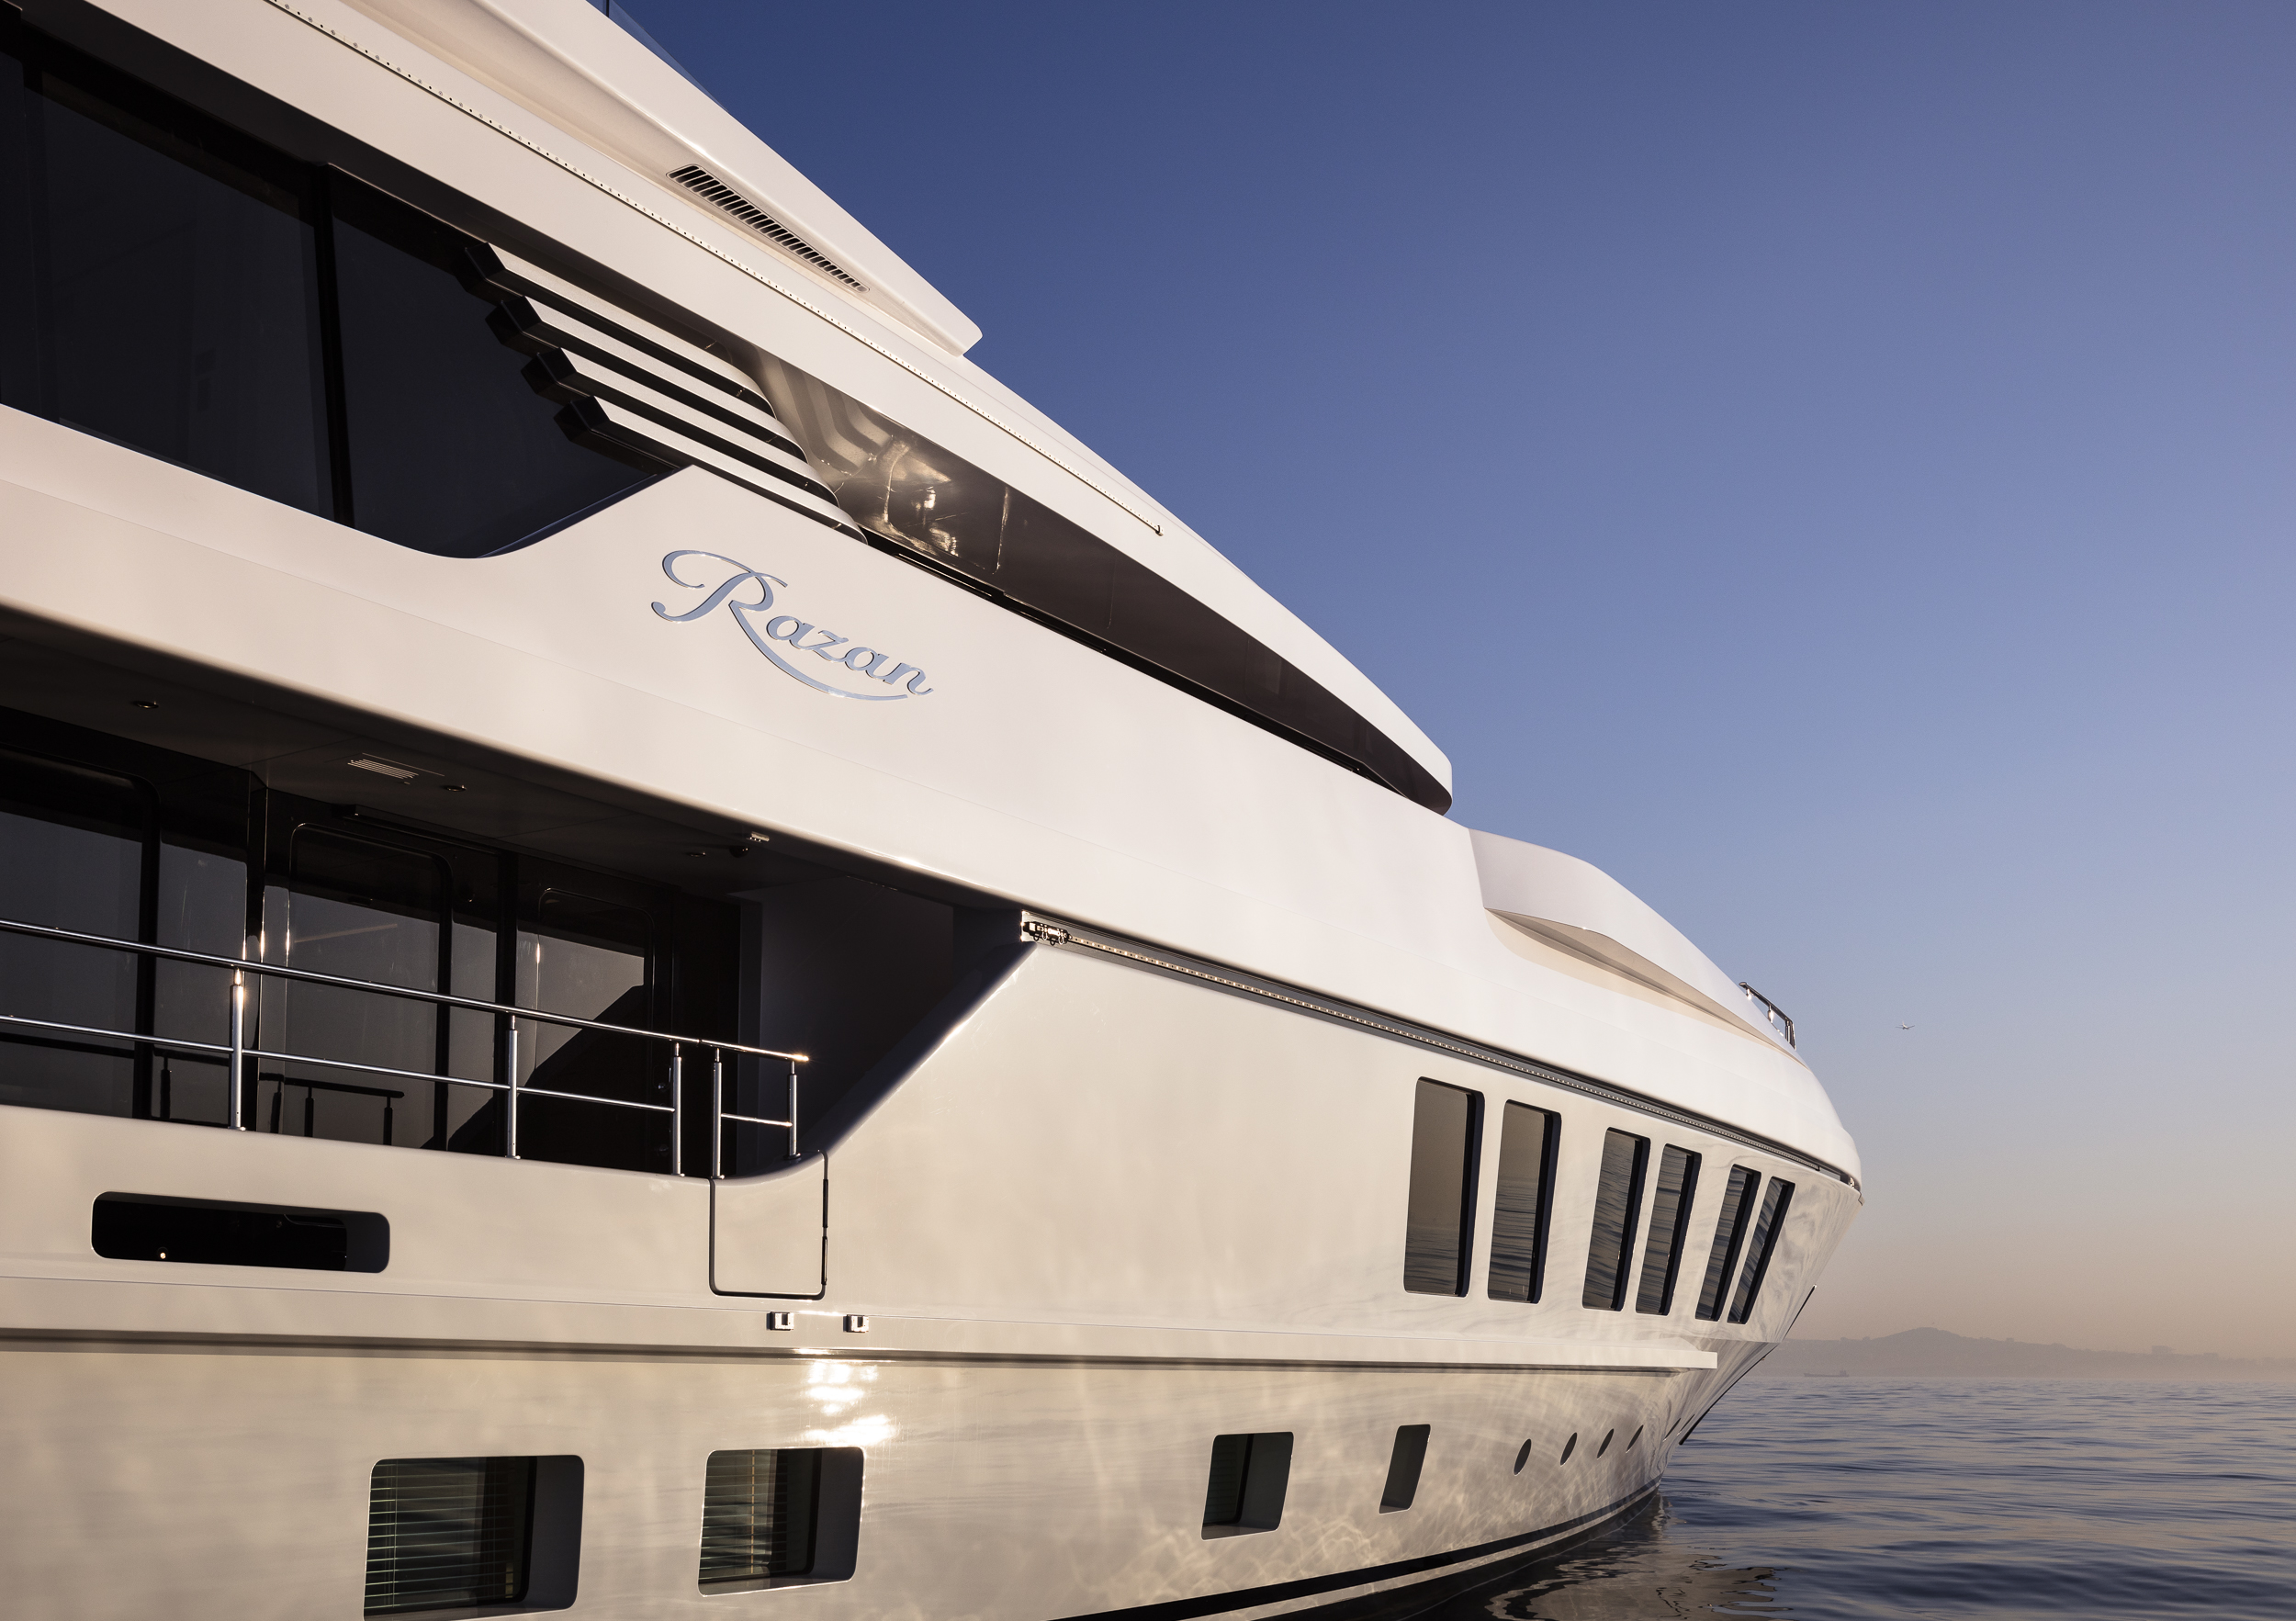 47 m Razan charter specs and number of guests